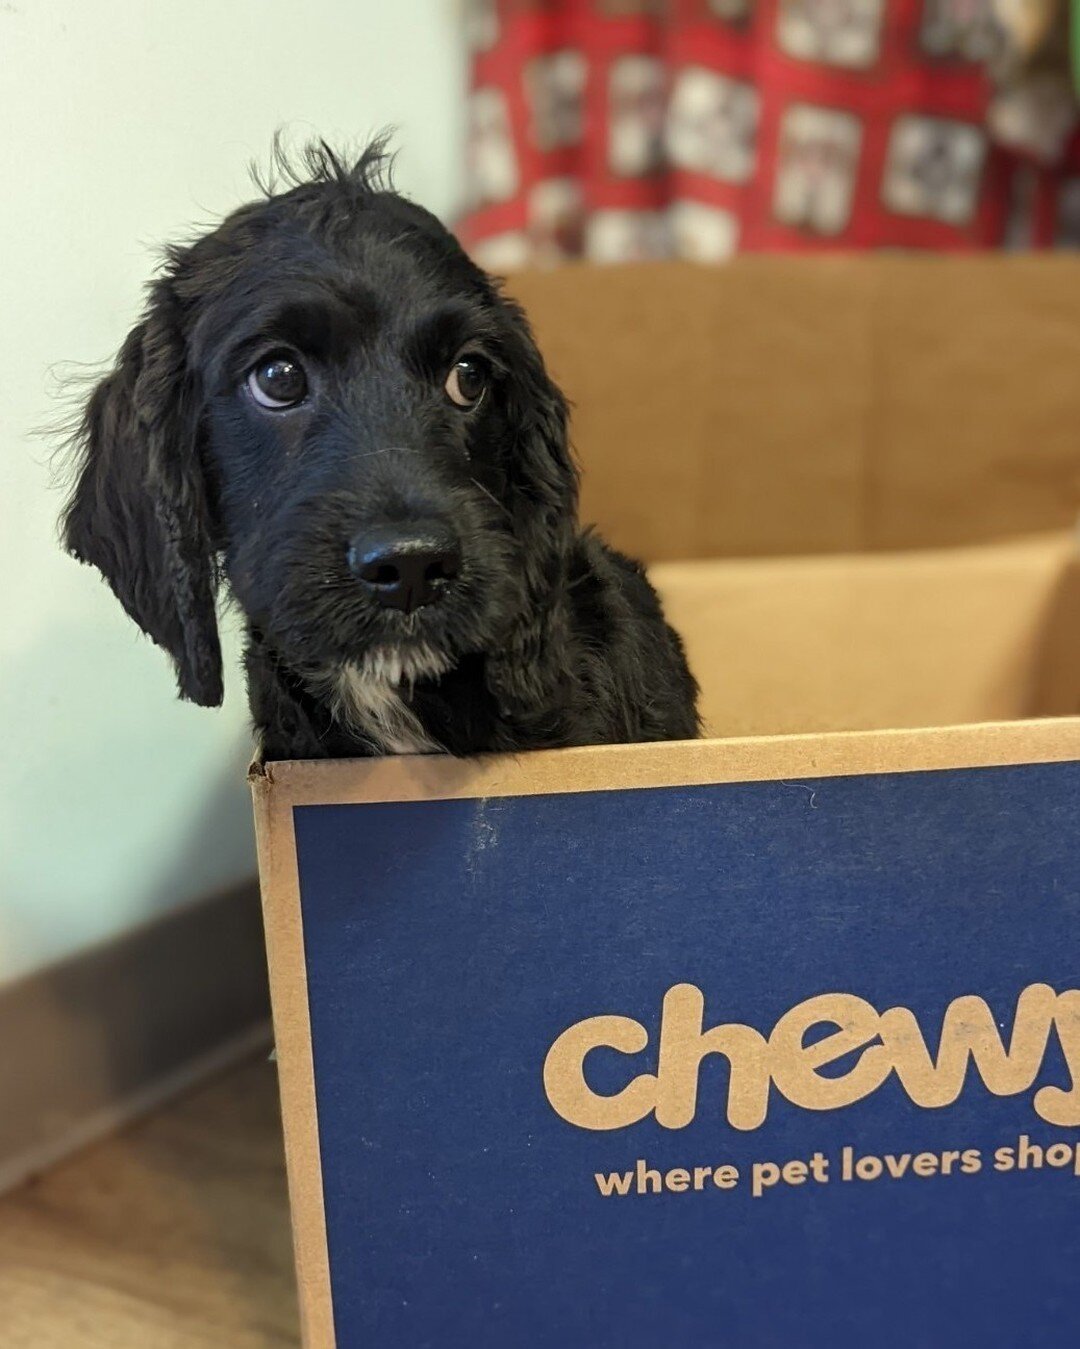 I know this is the box the #treats come in Chewy for life #cockapoo #puppy #adorable #toocute #doodle #cockapoopuppy #love #peace #blessed #lovewhatyoudo #madewithlove #madeinillinois #Dekalb #sycamore #chicago #rockford #madison #naperville #stcharl